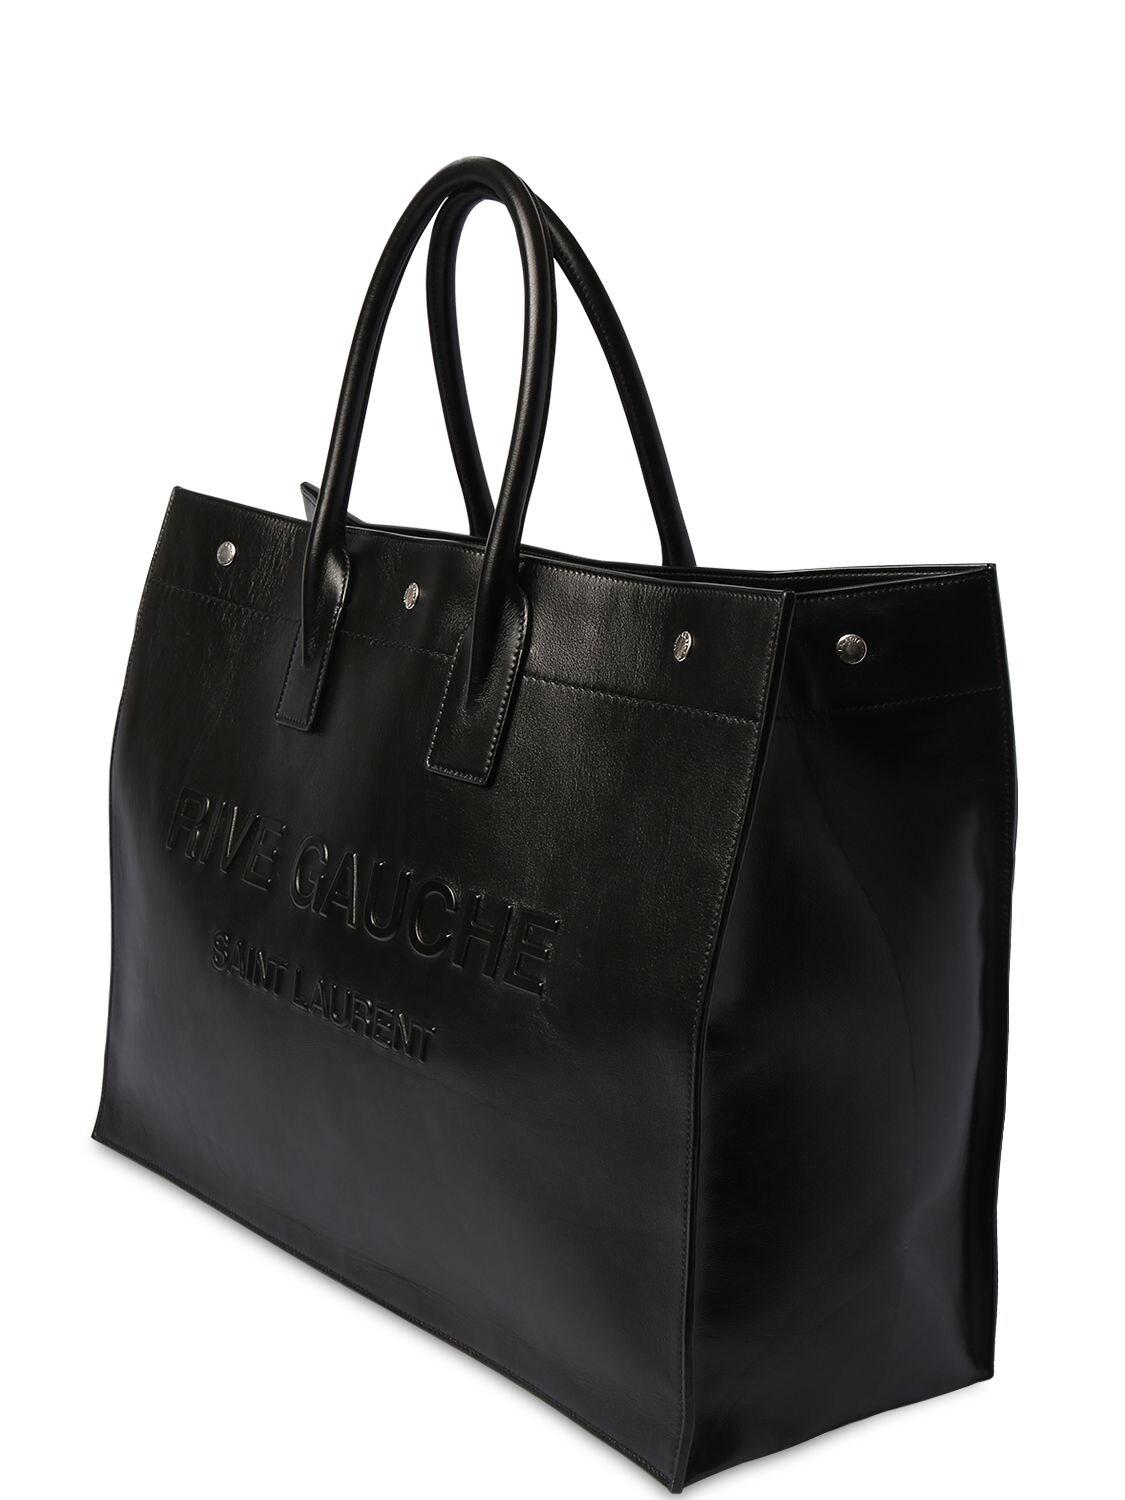 Shop Saint Laurent 2023 SS RIVE GAUCHE TOTE BAG IN CANVAS AND VINTAGE  LEATHER (735728FABJN9087) by beaute_mochi